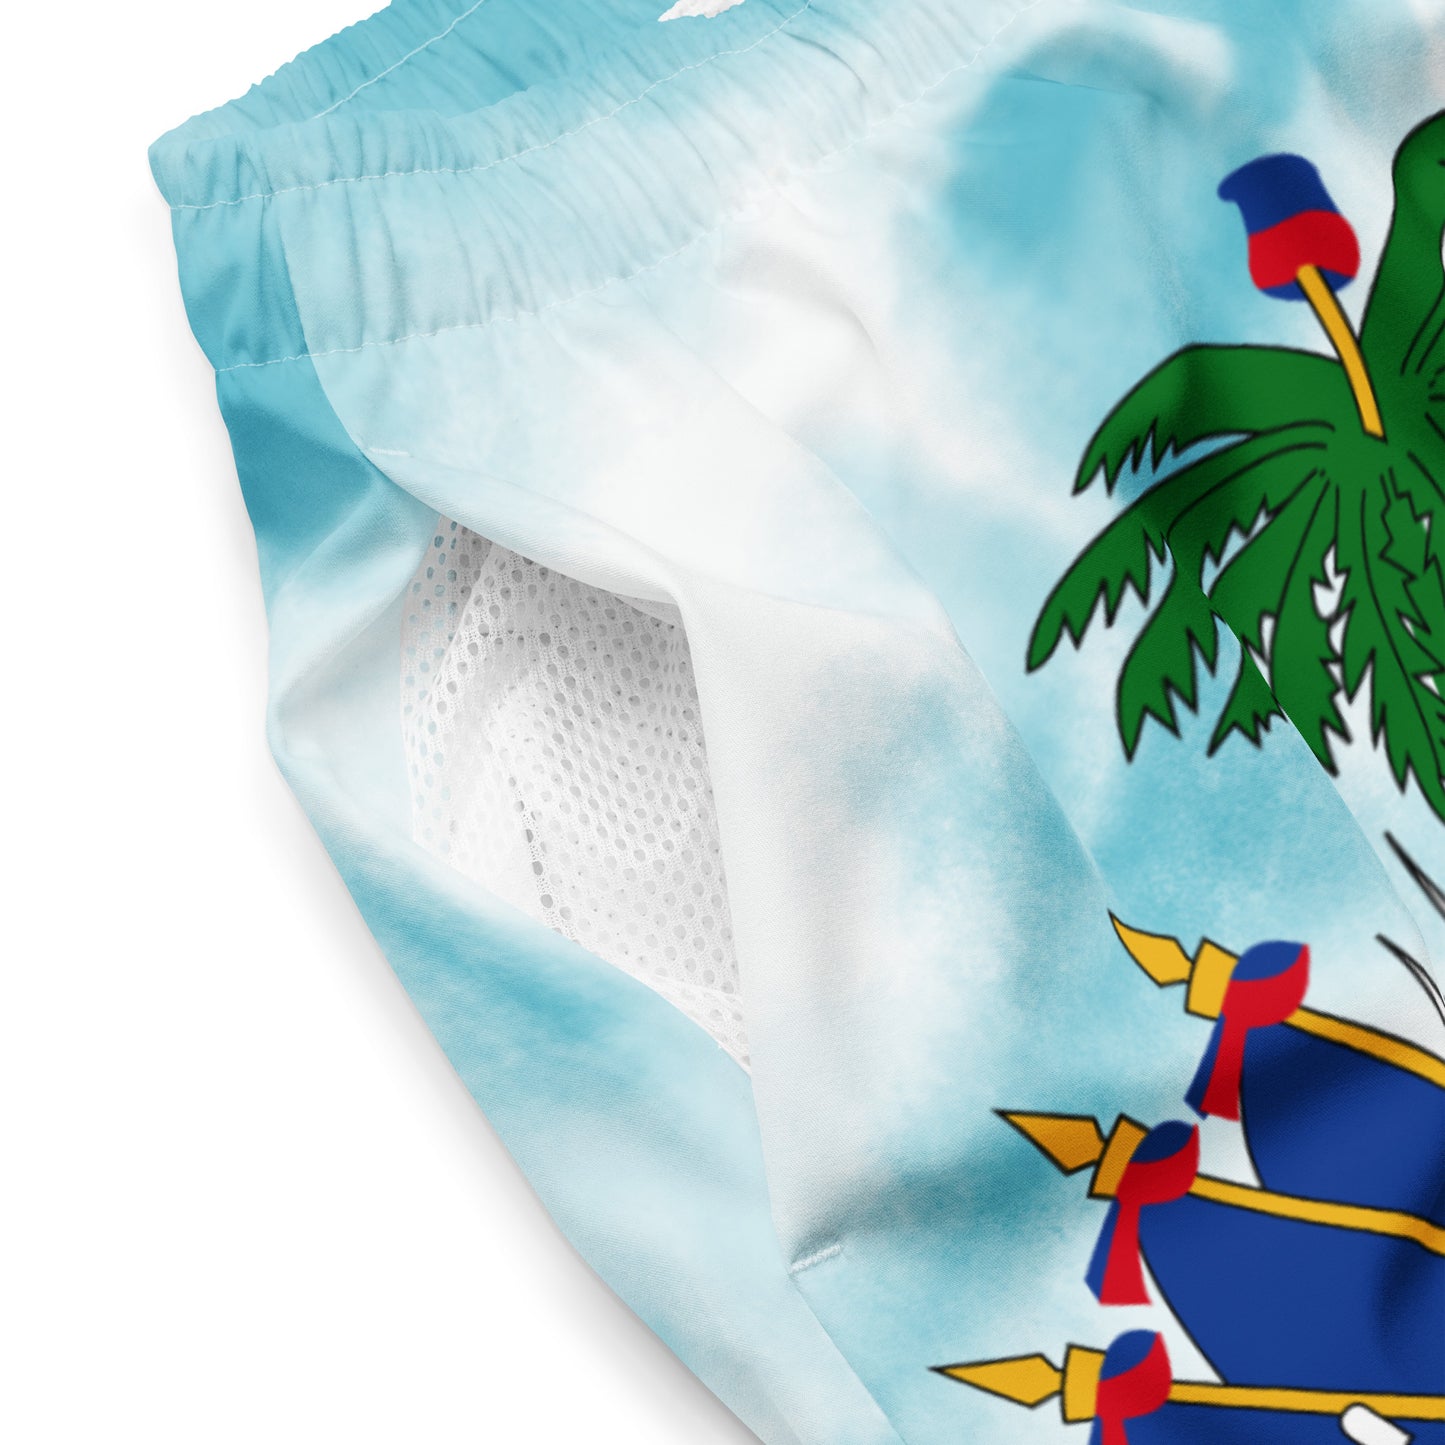 Men's swim trunks-summer activities-Haitian emblem-stay cool-théo gallery expo-théo photography